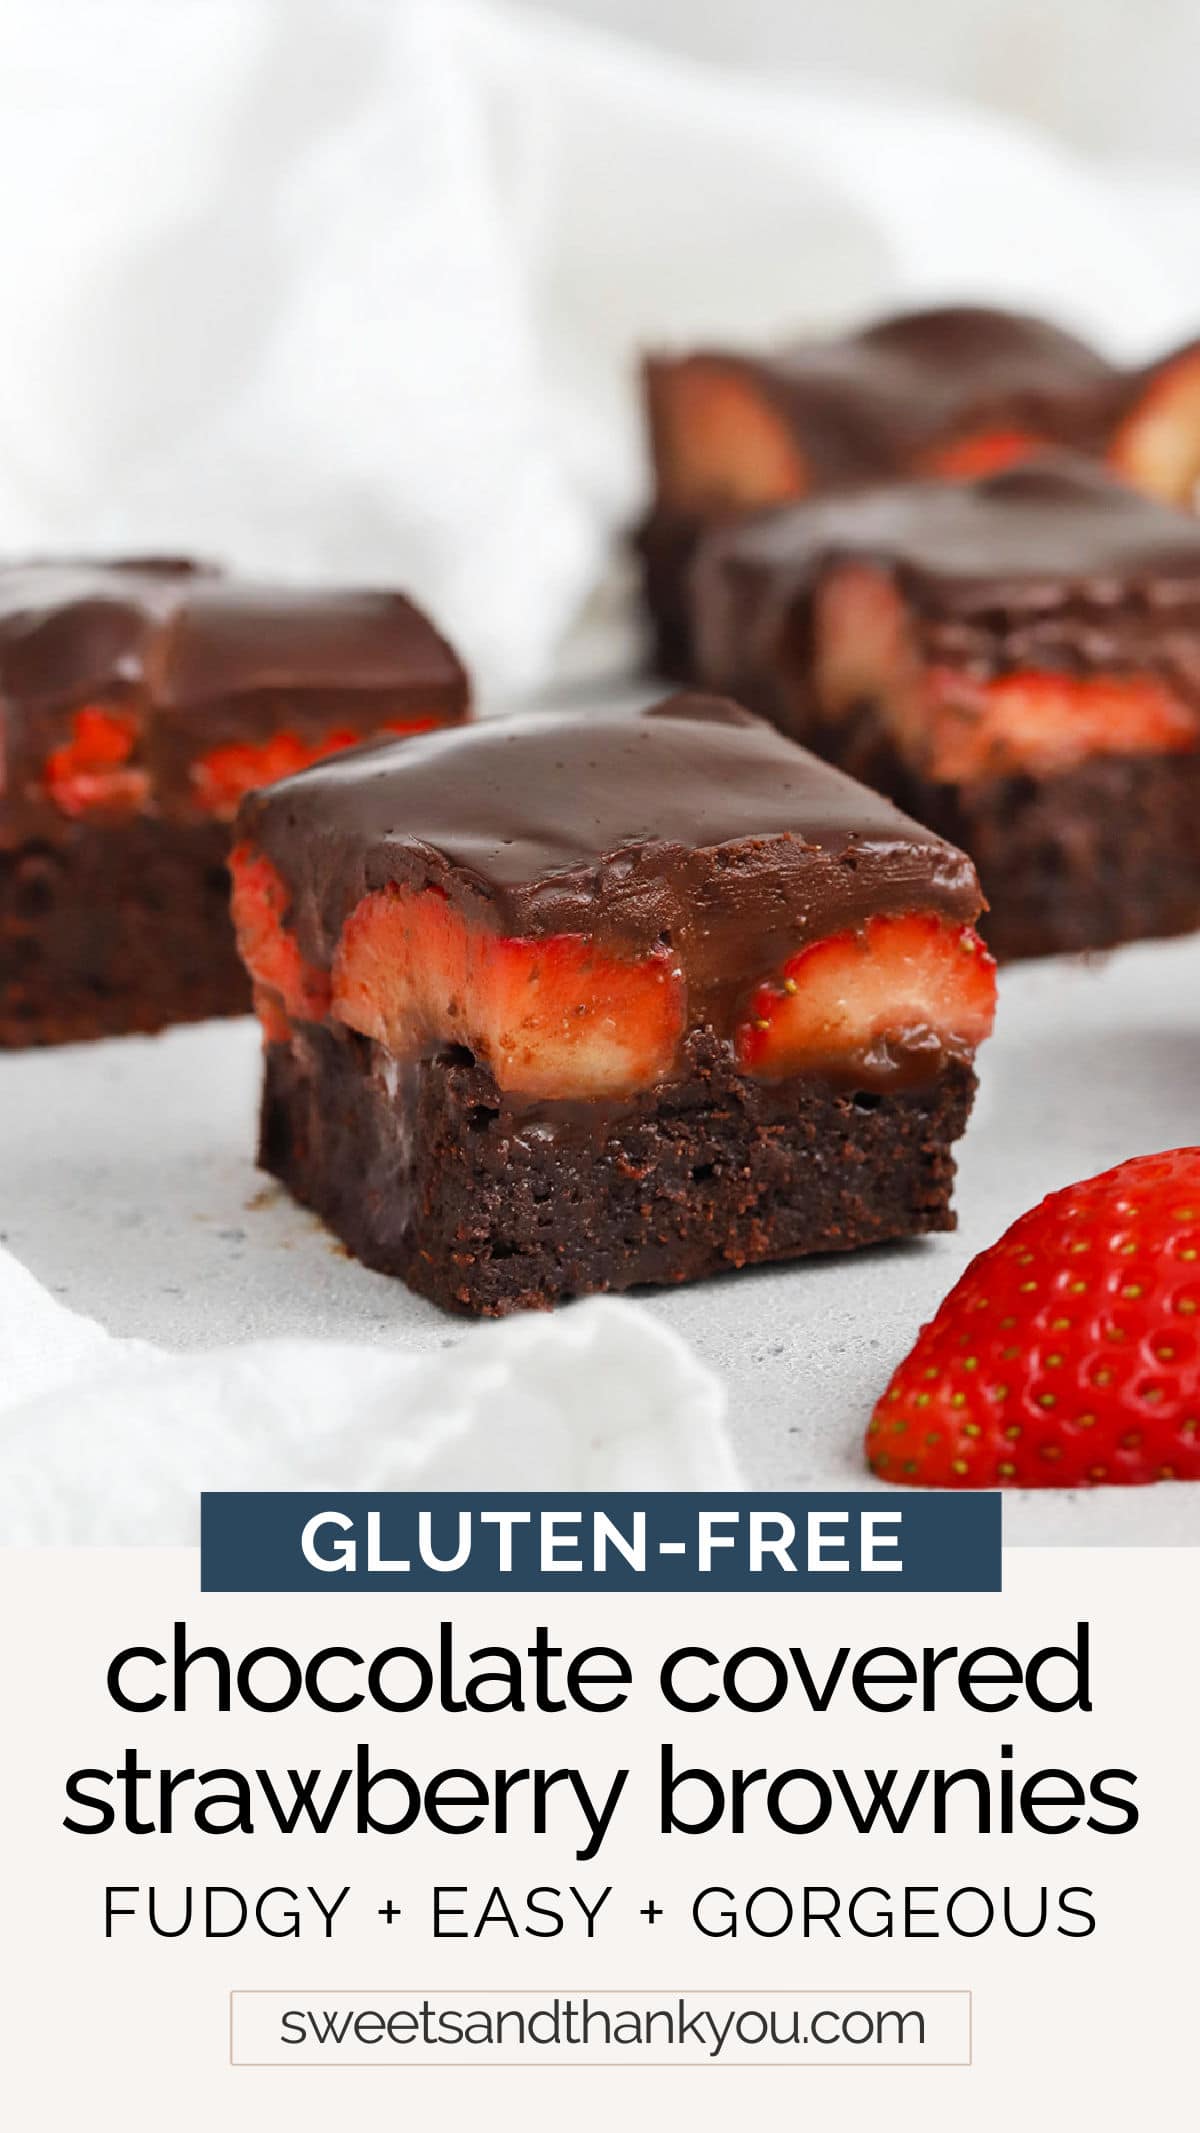 Gluten-Free Chocolate Covered Strawberry Brownies - Fudgy gluten-free brownies are topped with fresh, ripe strawberries and a glorious chocolate ganache that'll make your heart sing! // gluten-free strawberry brownies // gluten-free valentine's brownies // gluten-free dessert // valentines dessert // strawberry brownie recipe // Sweets And Thank You brownie recipe